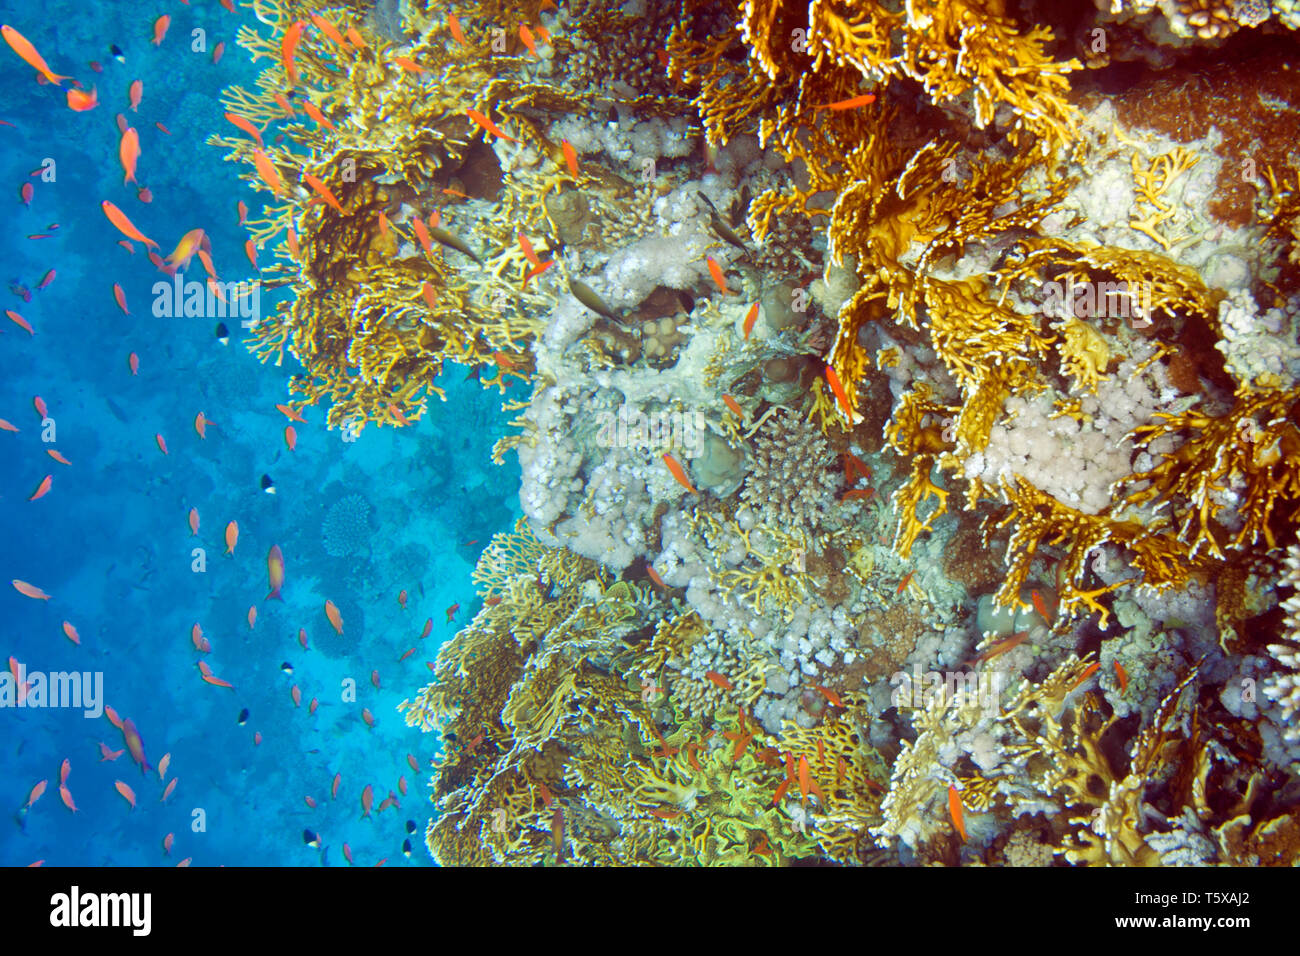 Millepora dichotoma coral and chromis dimidiata fish. Underwater life of Red sea in Egypt. Saltwater fishes and coral reef. Fire hard coral Stock Photo